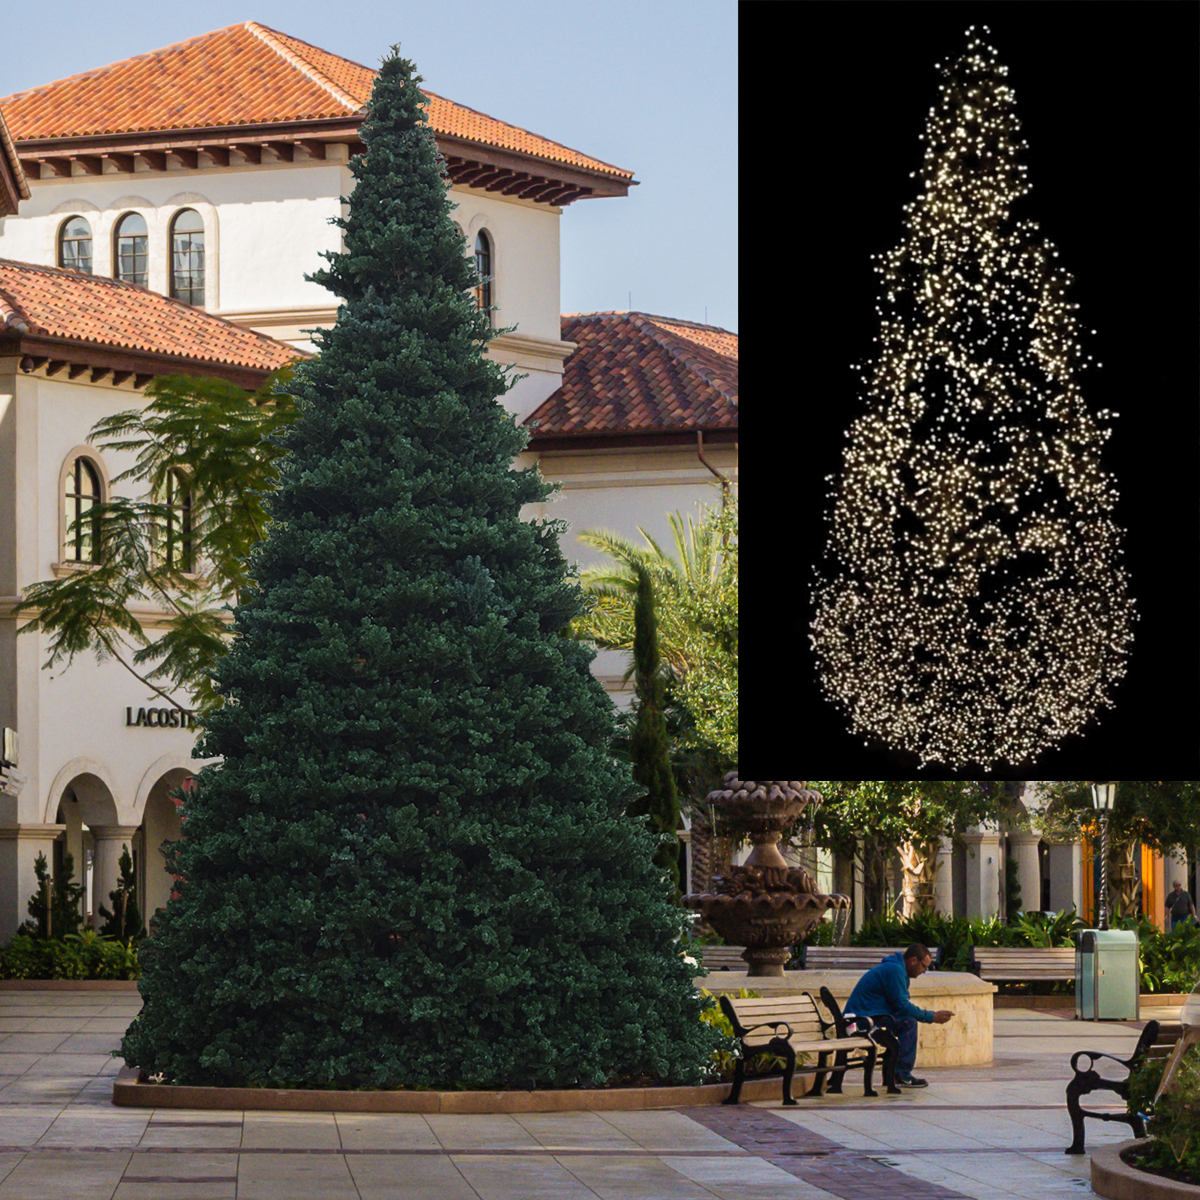 Sterling Summit Christmas Tree - 18ft Tall - Warm White LED Lights - Commercial Christmas Display